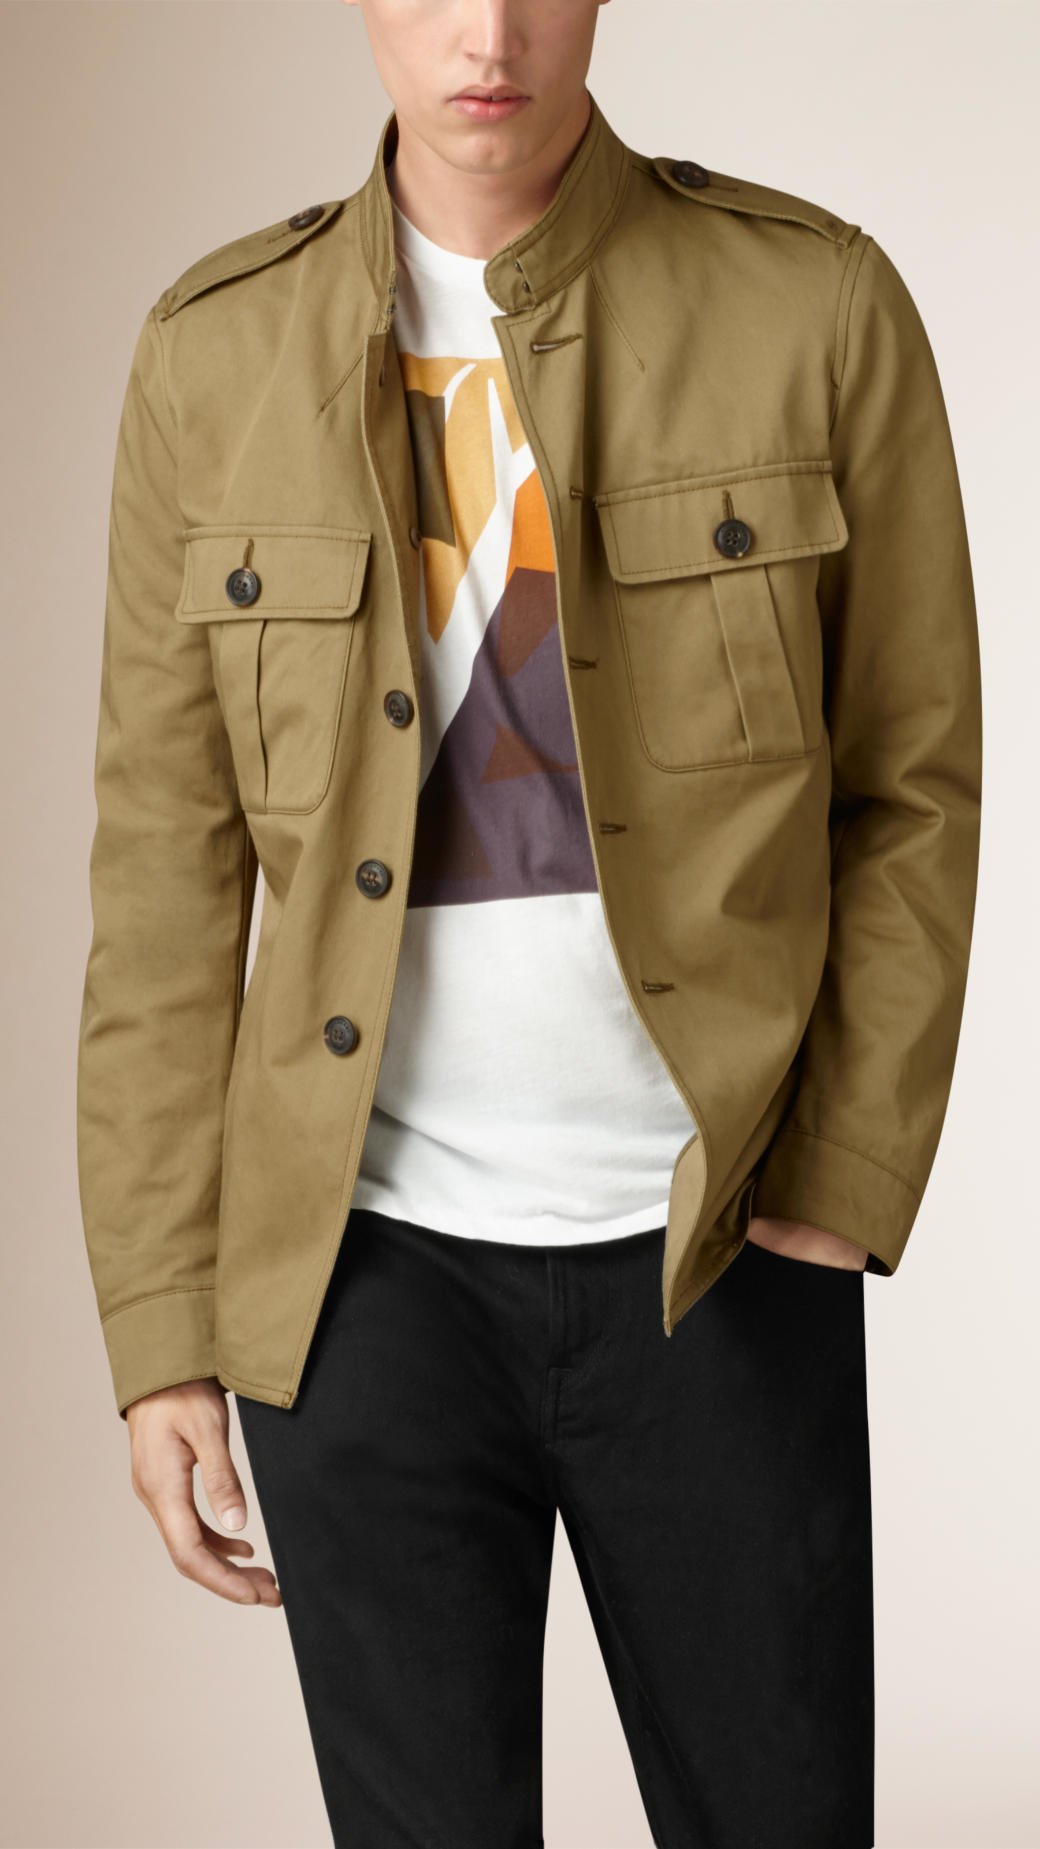 Burberry Cotton Twill Field Jacket in Natural for Men - Lyst